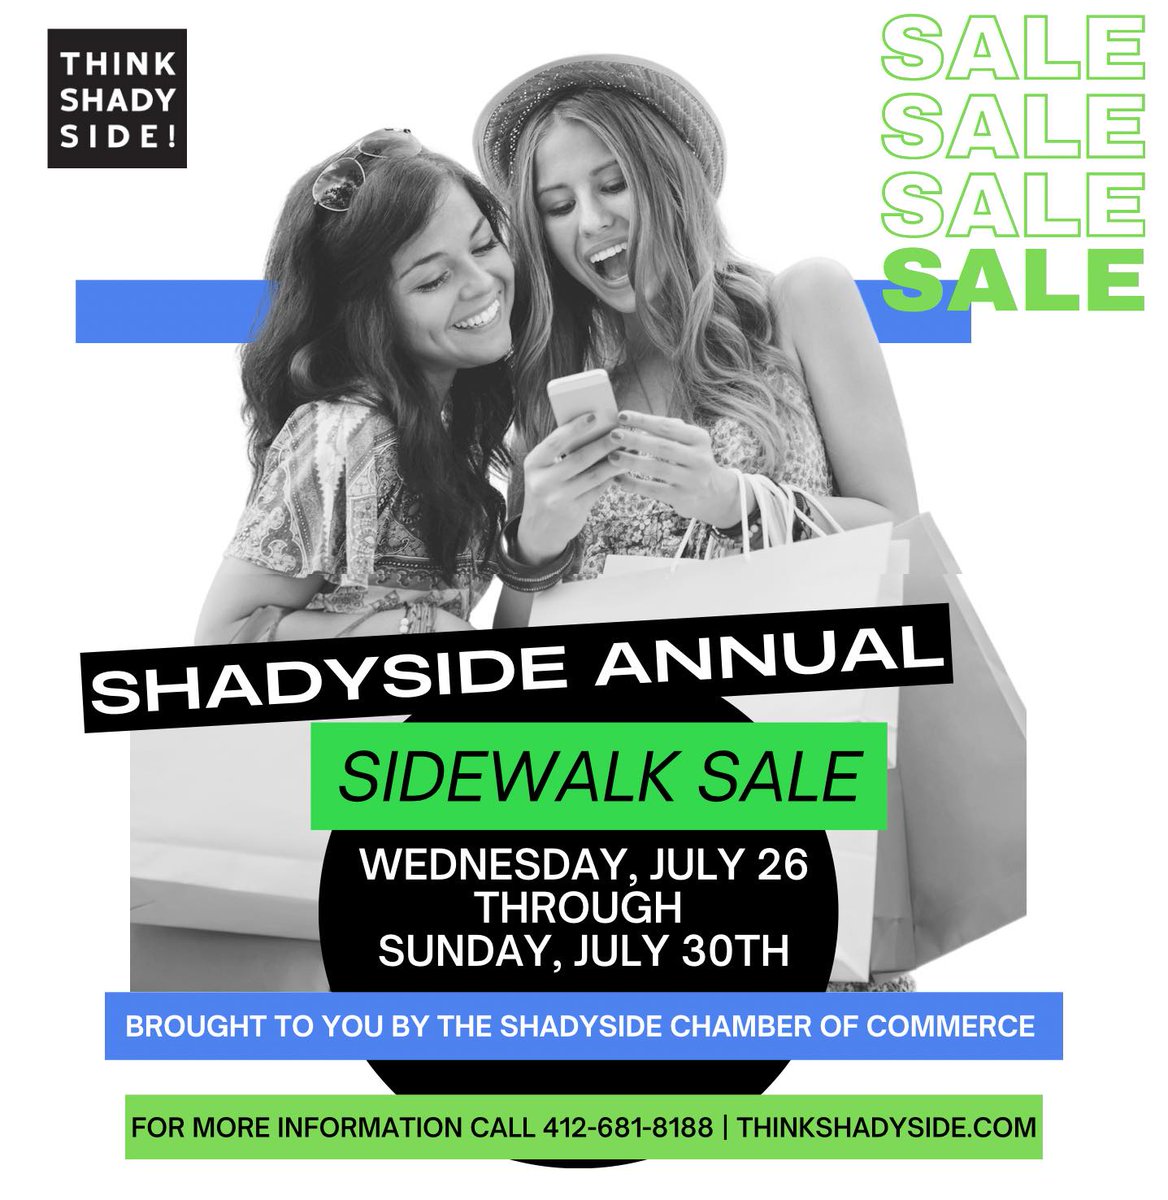 Stop in at Glassworks and Cheeks and Feathers during the Annual Shadyside Sidewalk Sale, taking place Wednesday, July 26th - Sunday, July 30th from 10 am to 5 pm each day. Head down to Walnut Street and it's side streets next week to find bargains! 
#shadyside #pittsburghevents